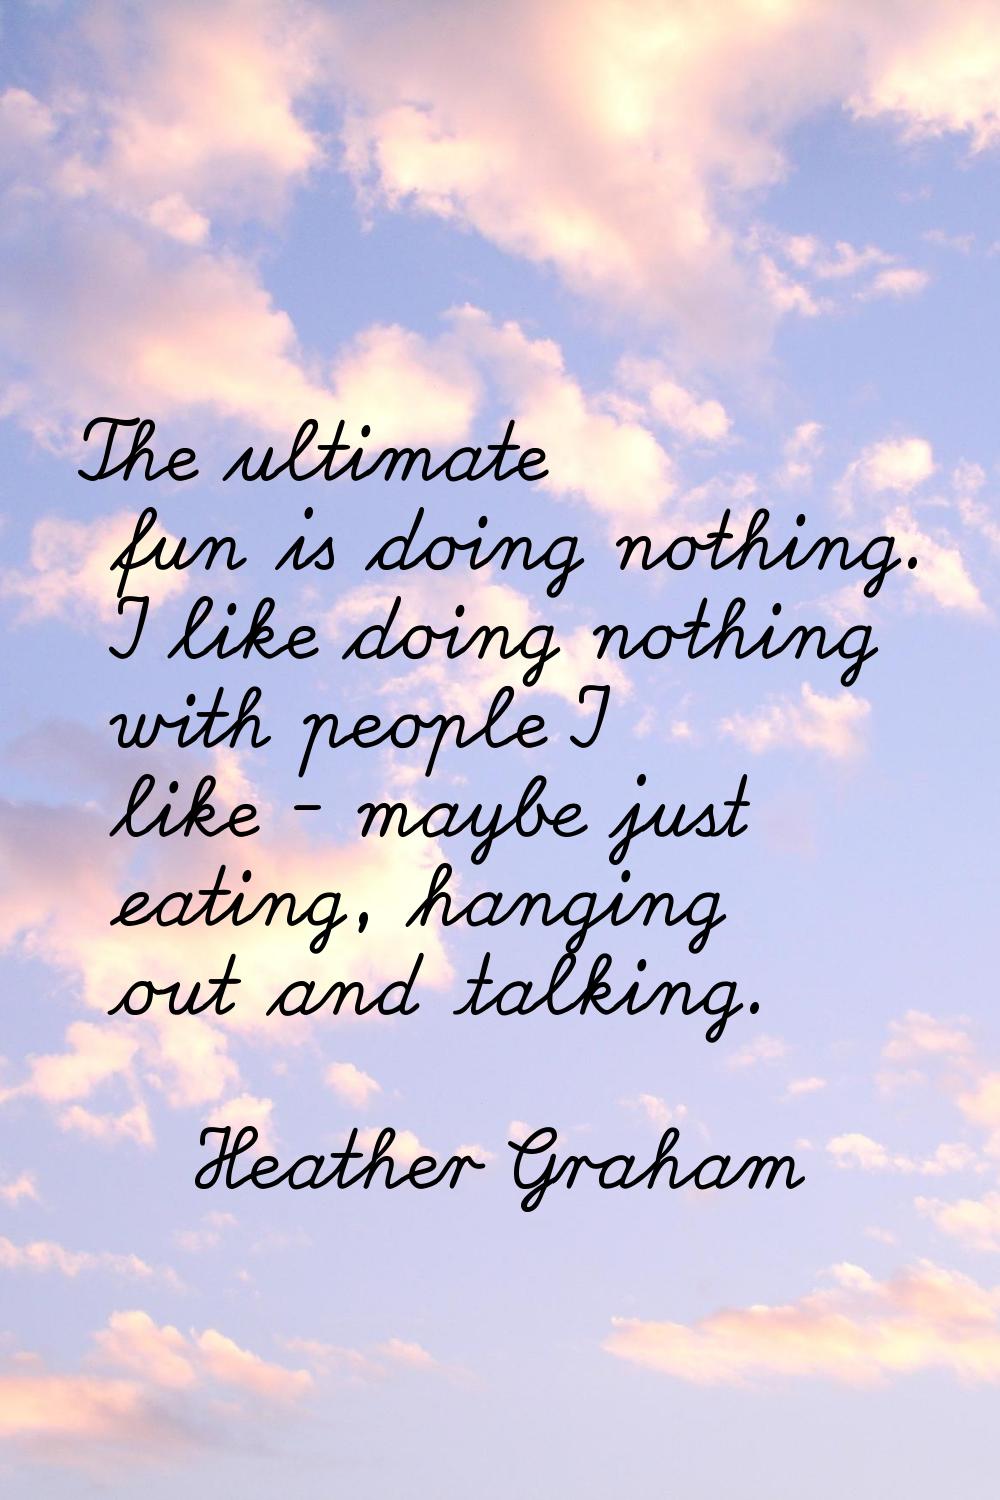 The ultimate fun is doing nothing. I like doing nothing with people I like - maybe just eating, han